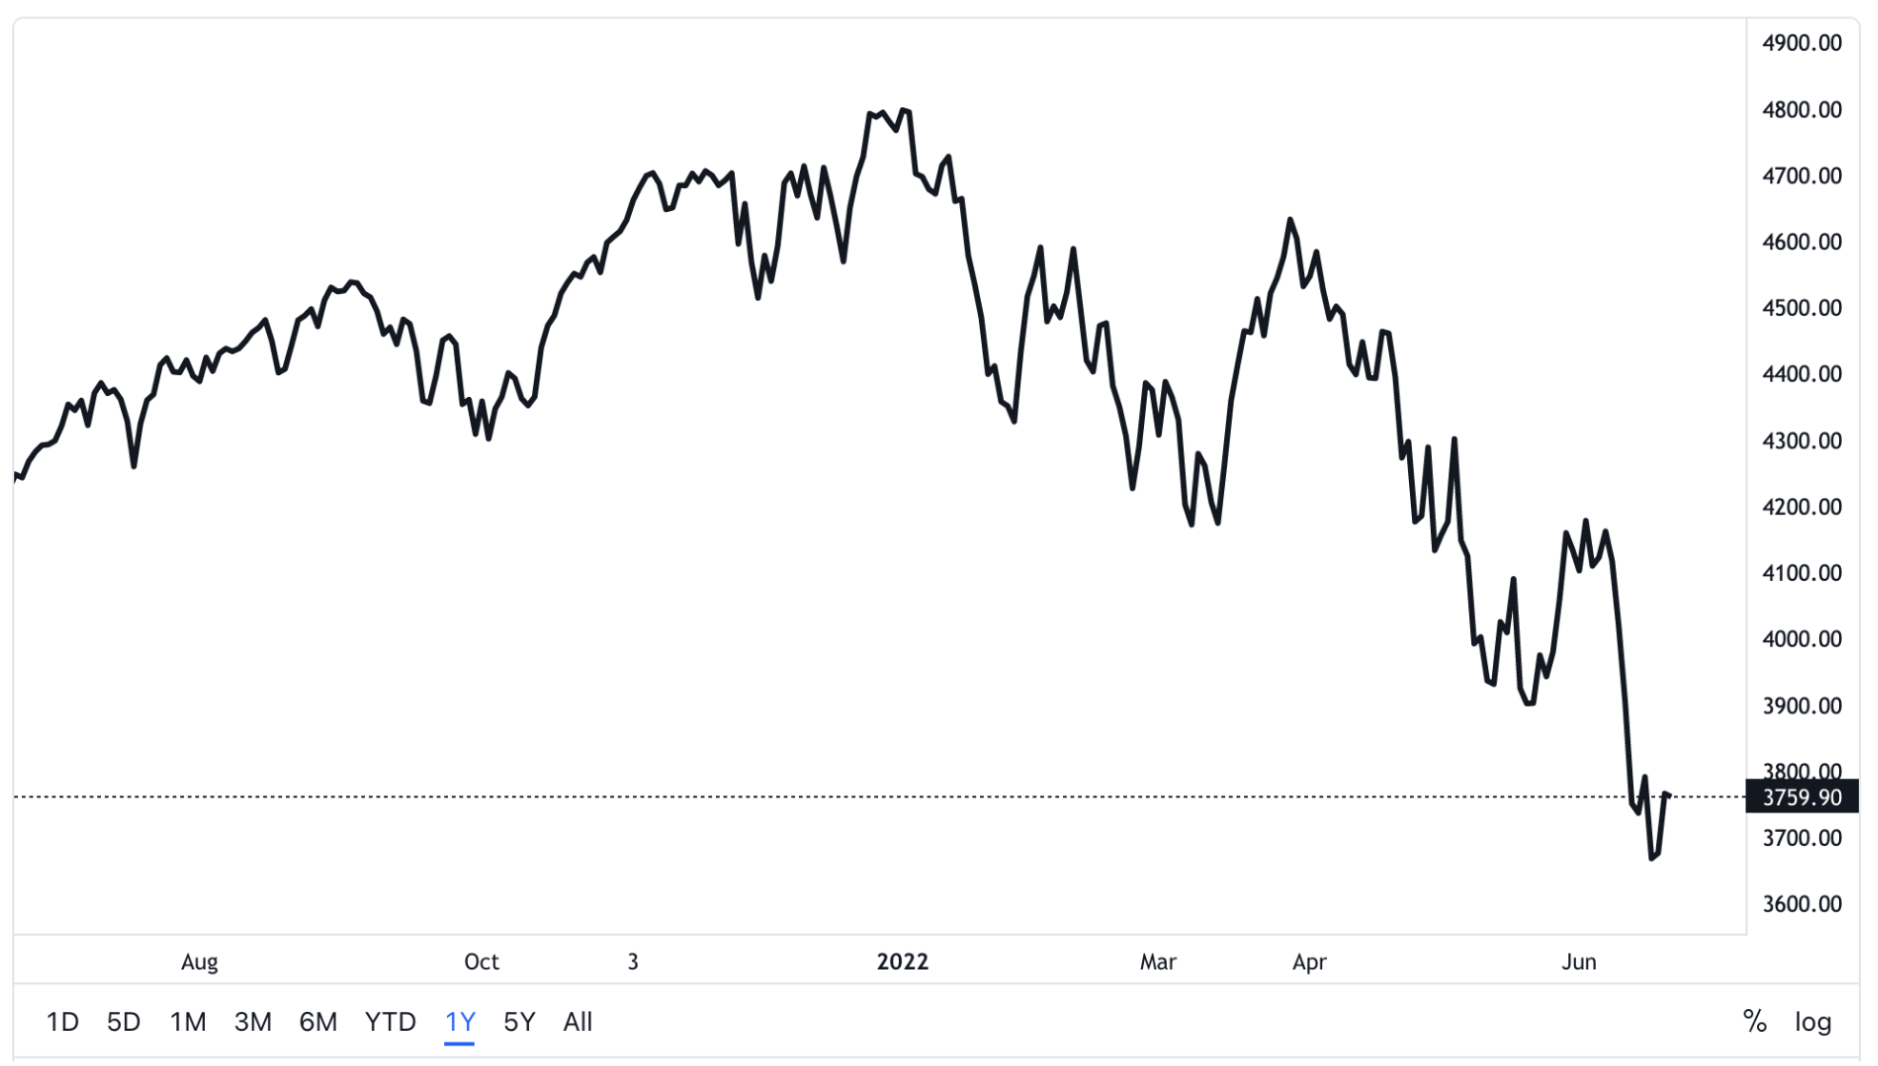 ▲The S&P 500 index is down 21% since the beginning of 2022, the worst first half since 1970. Source: TradingView